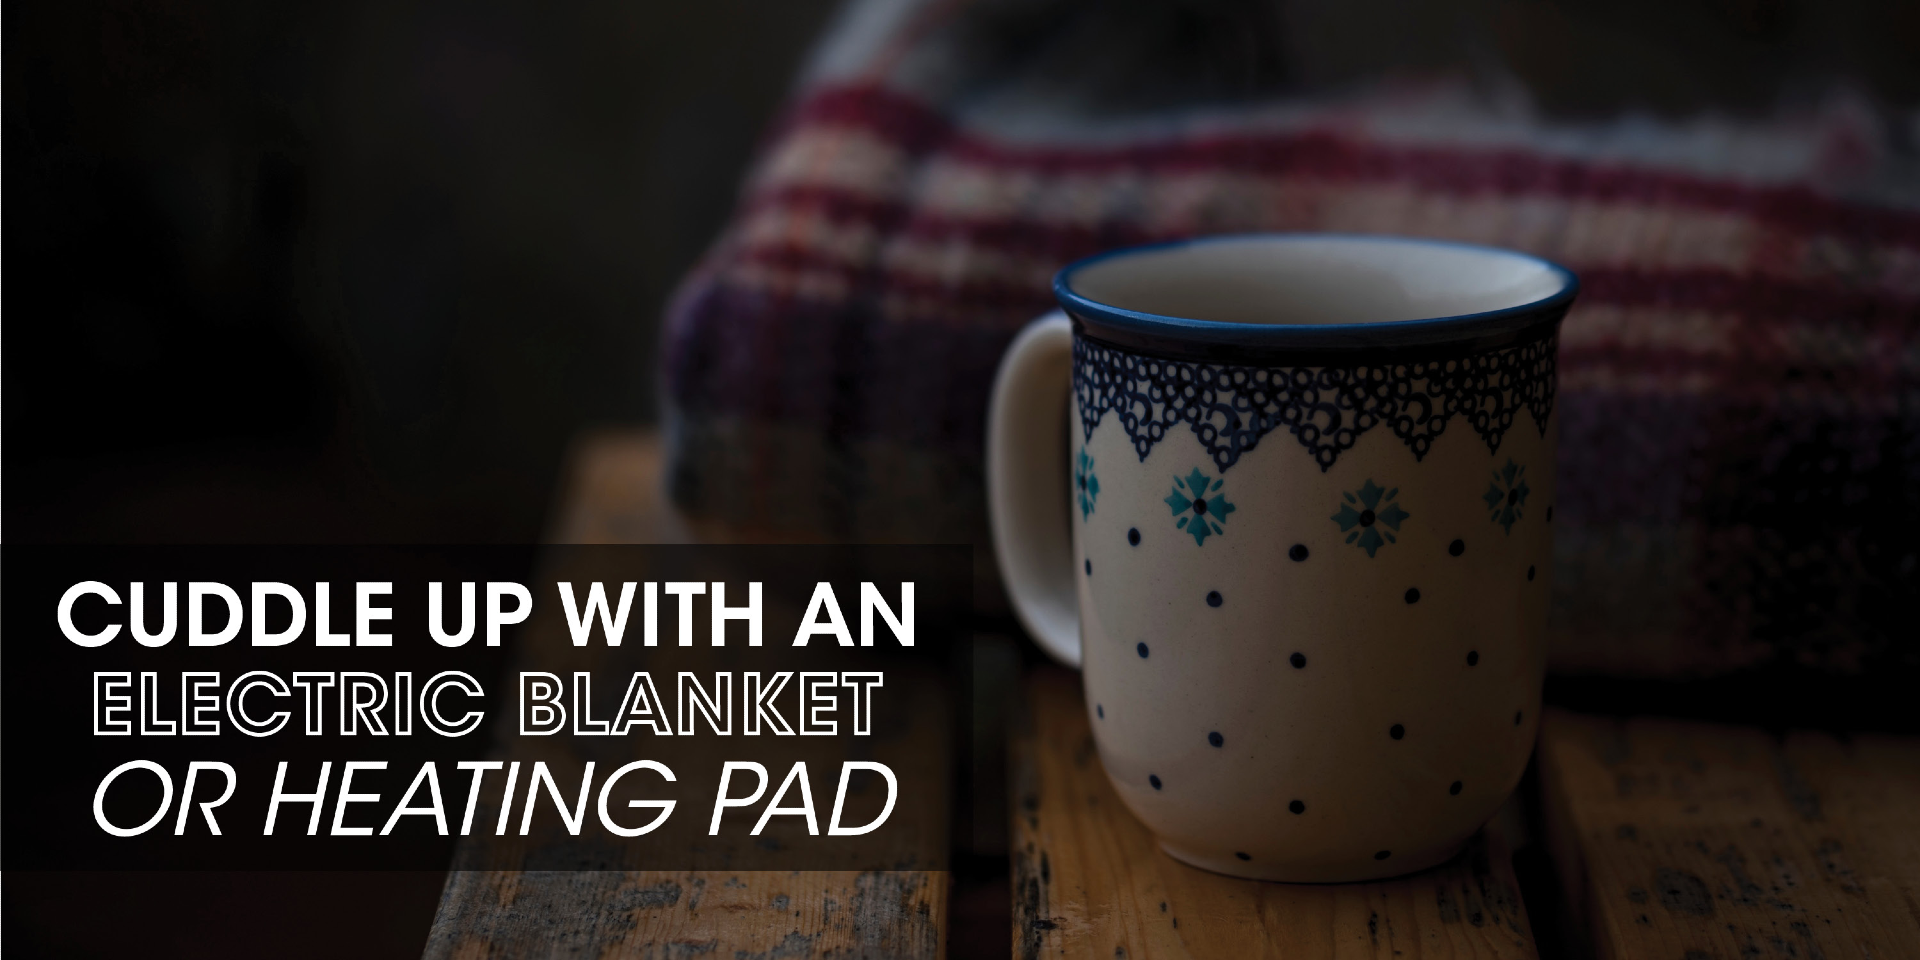 Coffee mug and blanket with text: "Cuddle up with an electric blanket or heating pad"